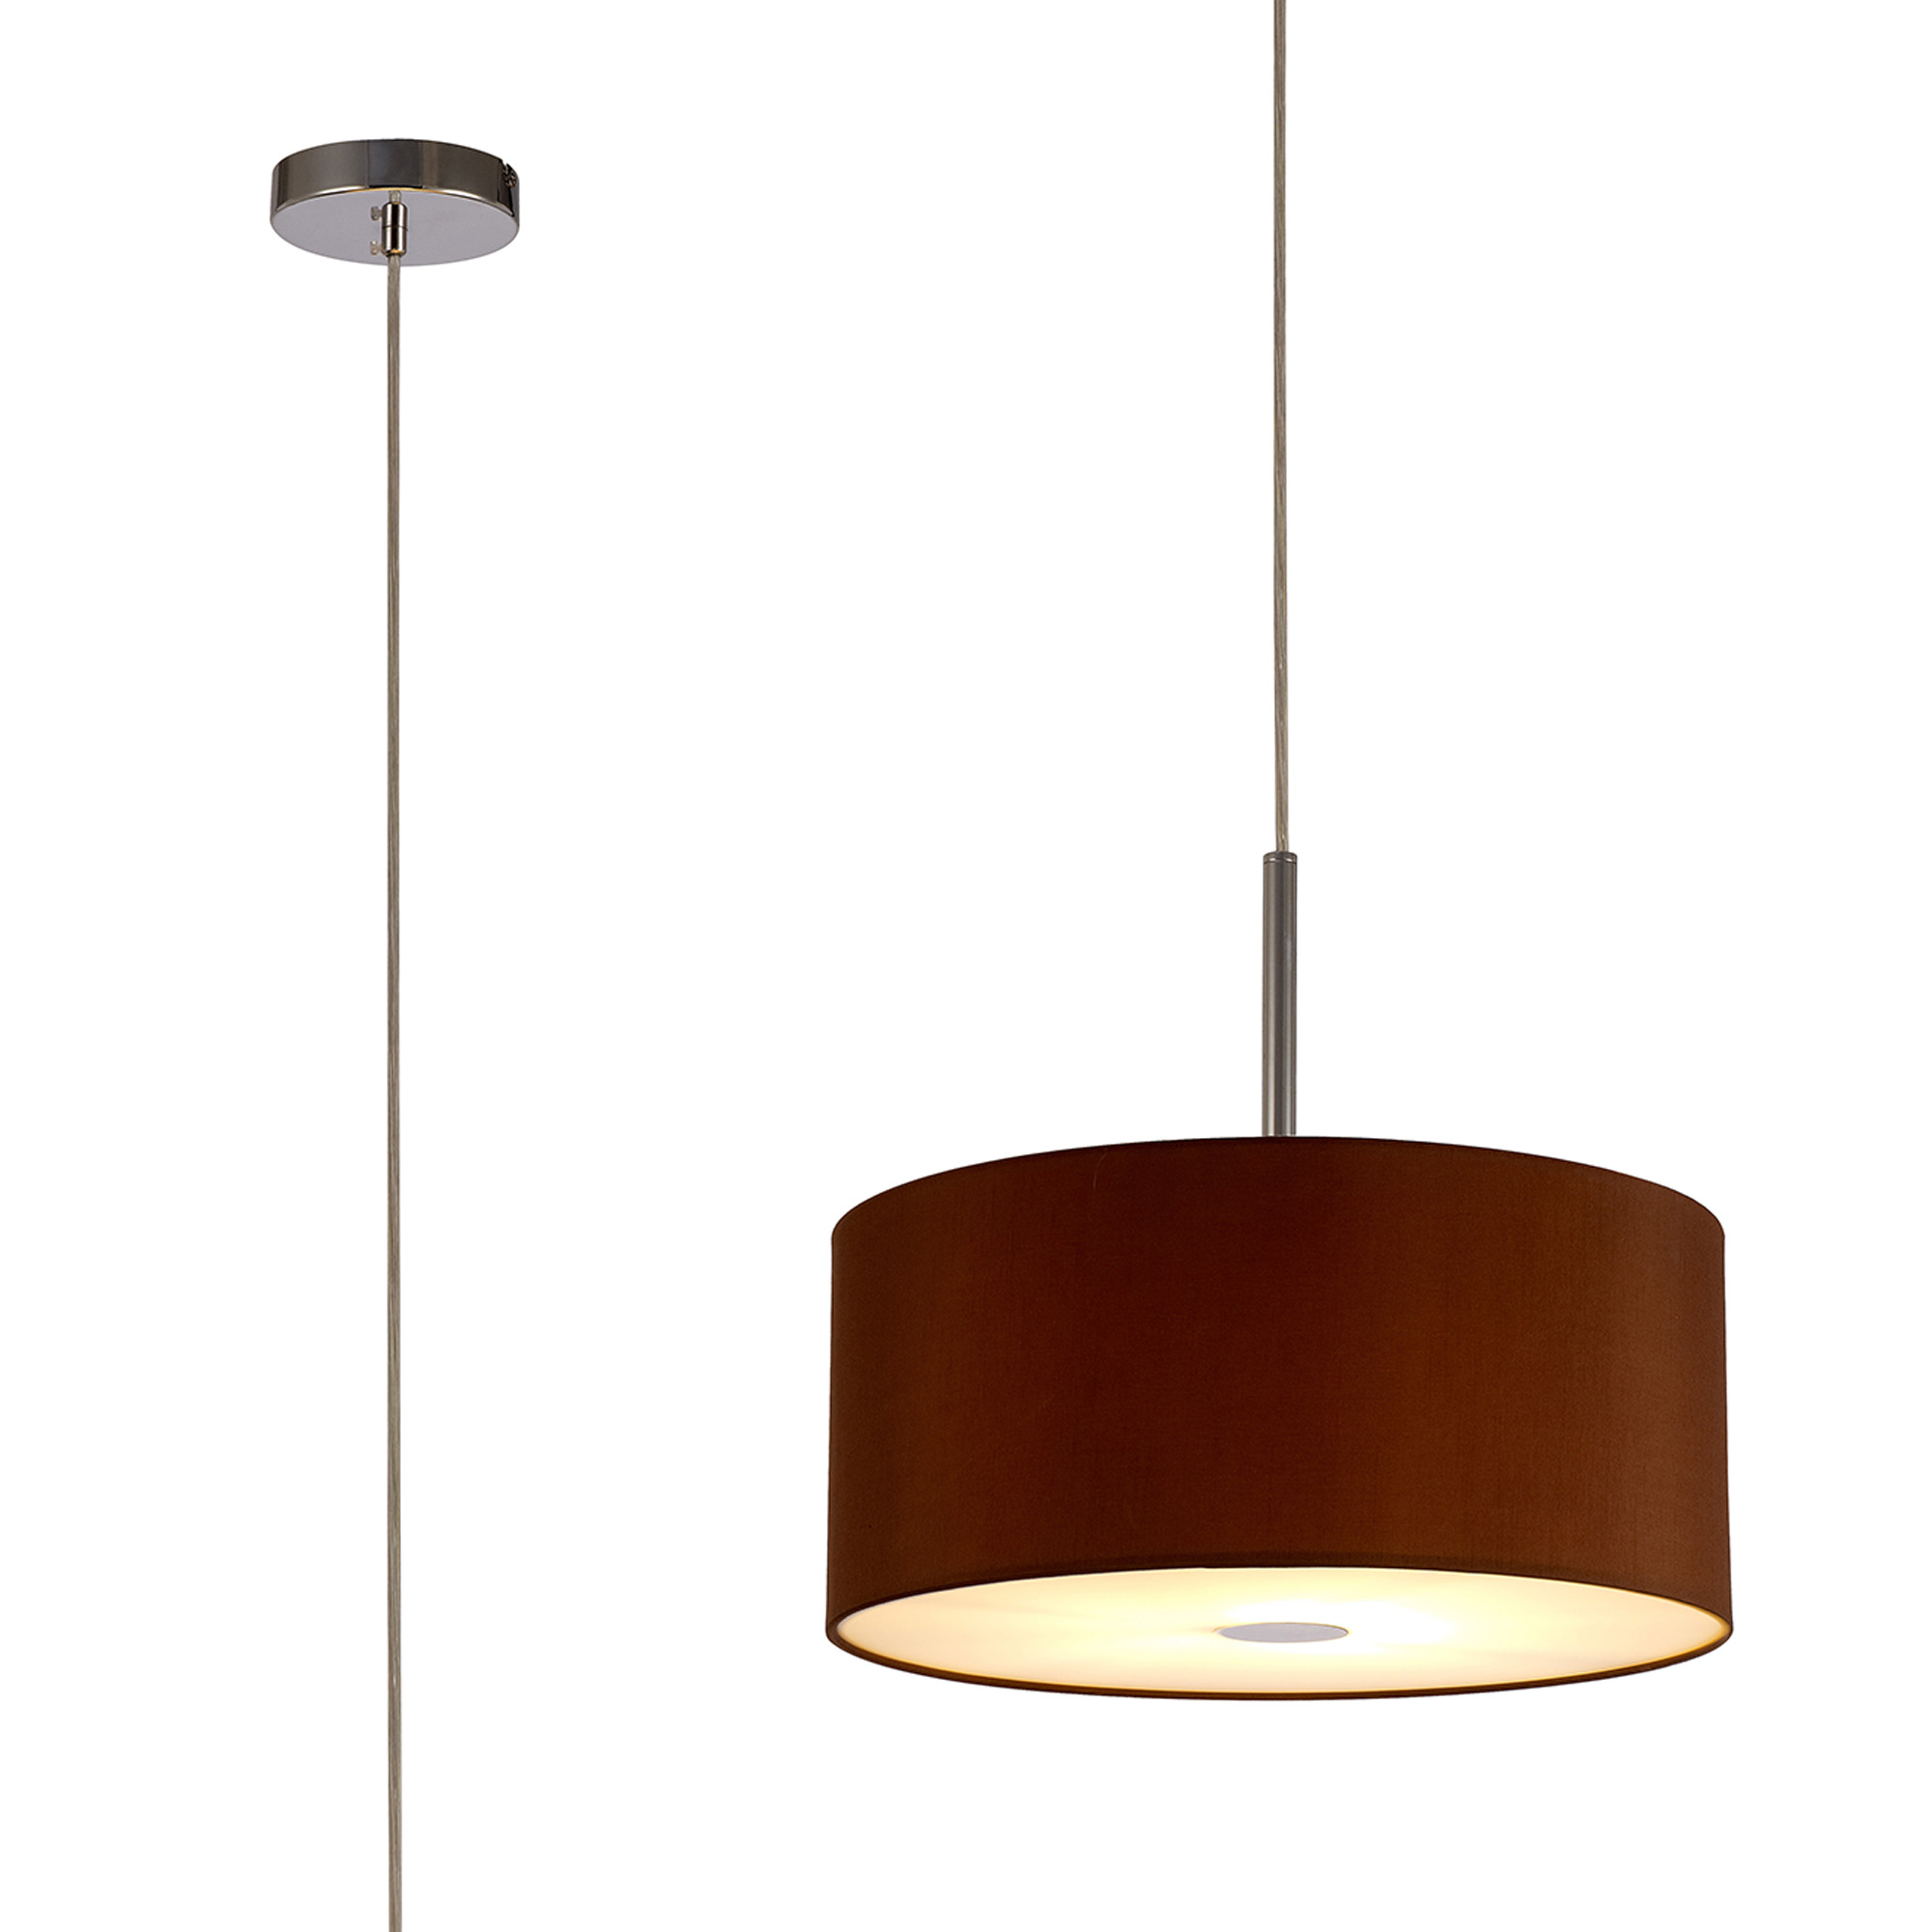 DK0138  Baymont 40cm Pendant 1 Light Polished Chrome; Raw Cocoa/Grecian Bronze; Frosted Diffuser